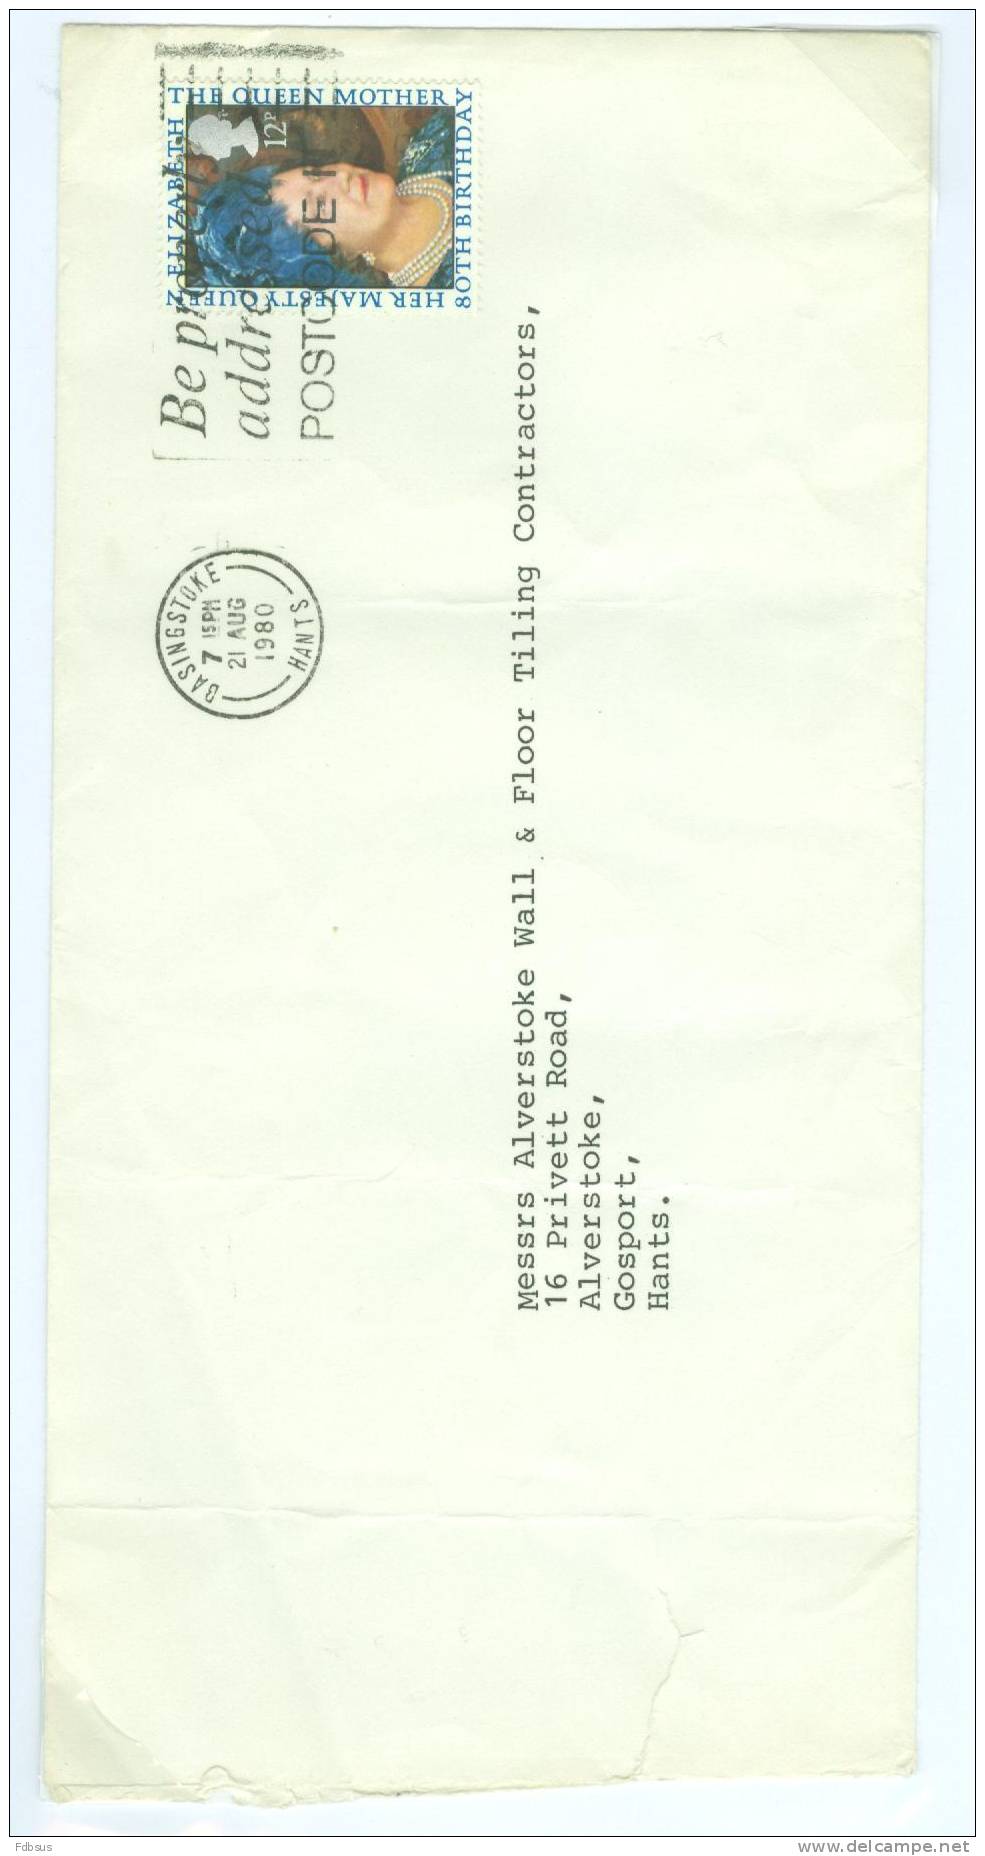 1980 SG 1129 ENVELOPPE BASINGSTOKE  - STAMP 80 BIRTHDAY QUEEN MOTHER - Unclassified